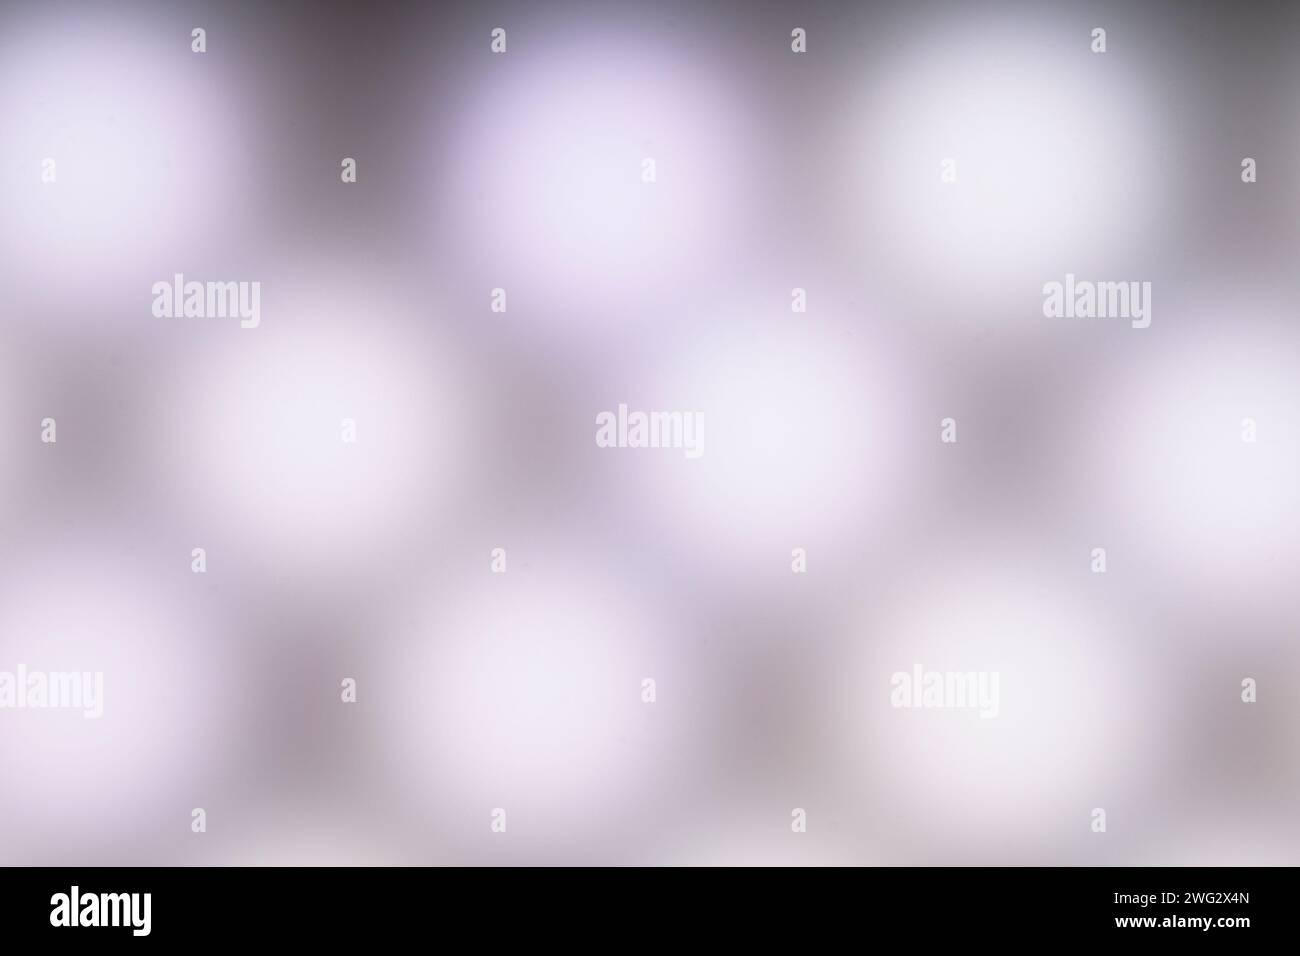 horizontal abstract blurred bright white led panel background Stock Photo